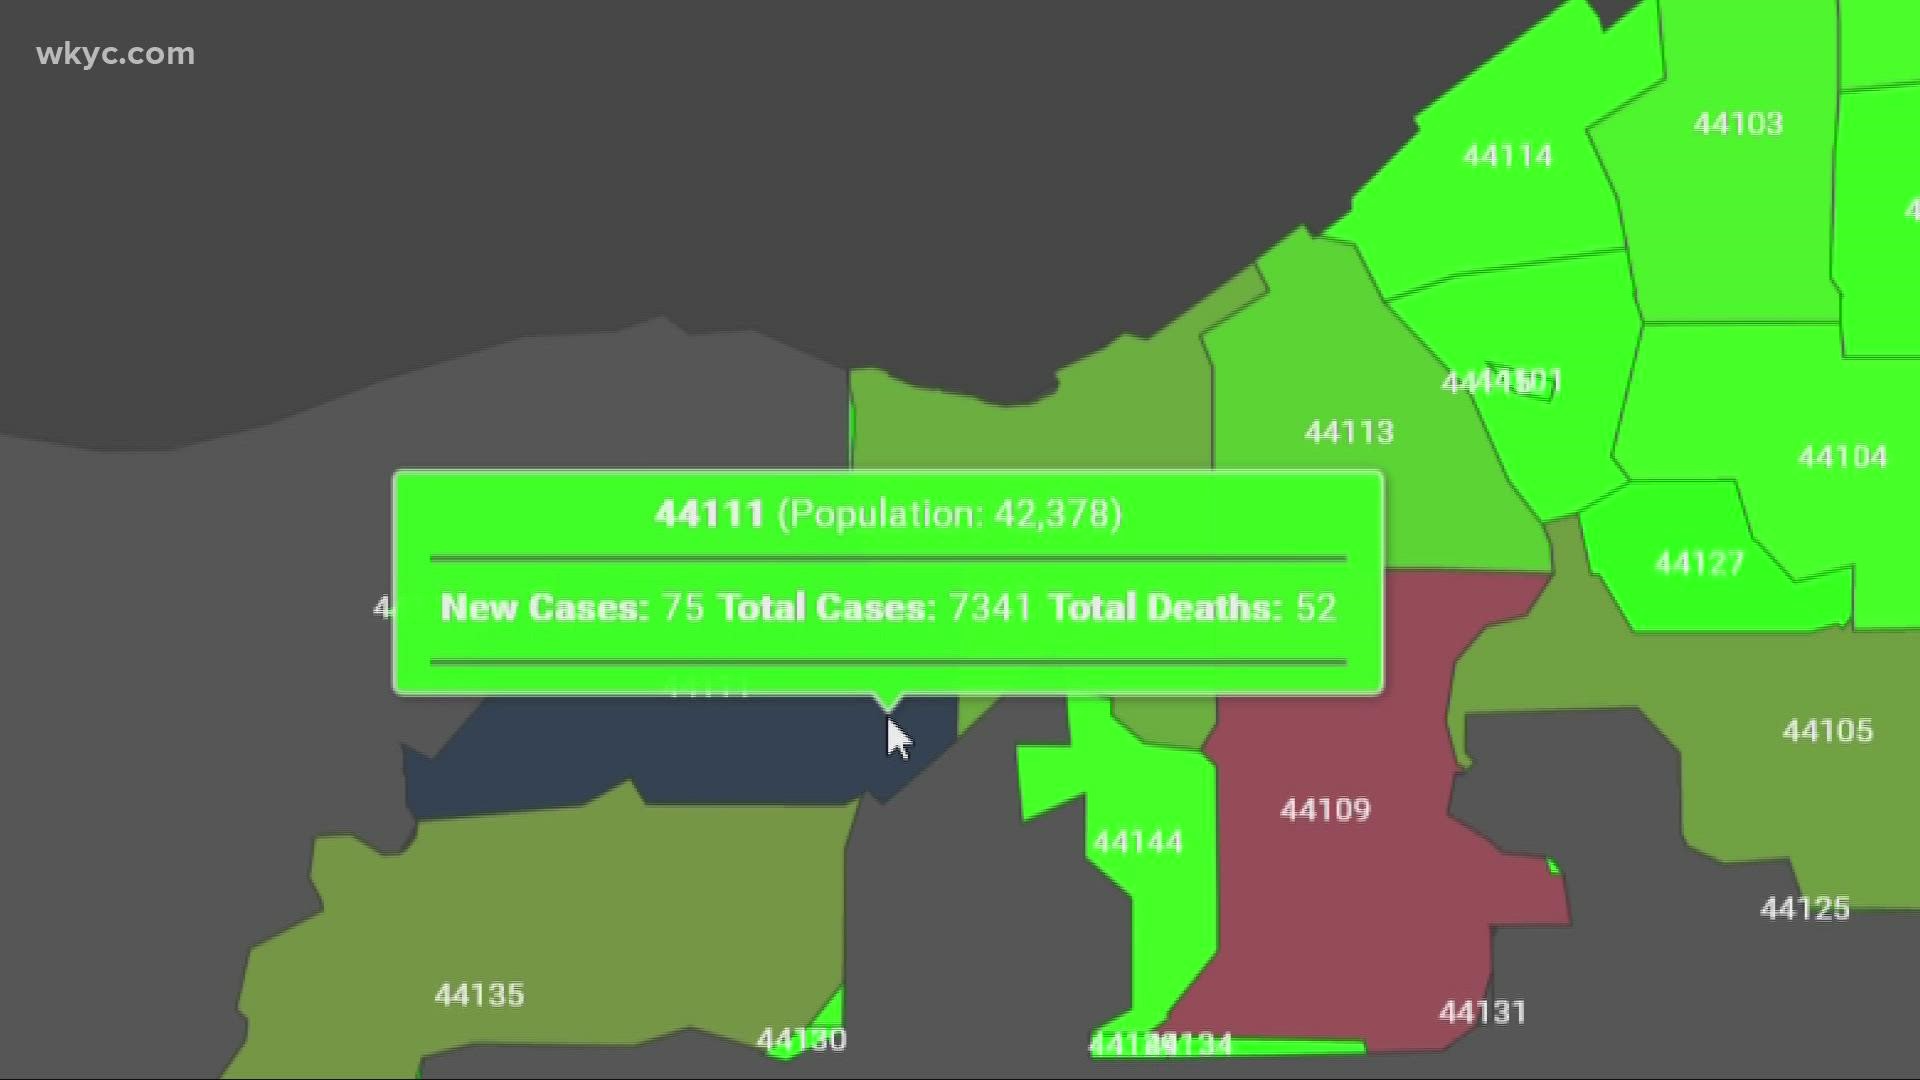 The public dashboard is hyper focused on the city of Cleveland and breaks down data by zip code, age, ethnicity, and other categories.